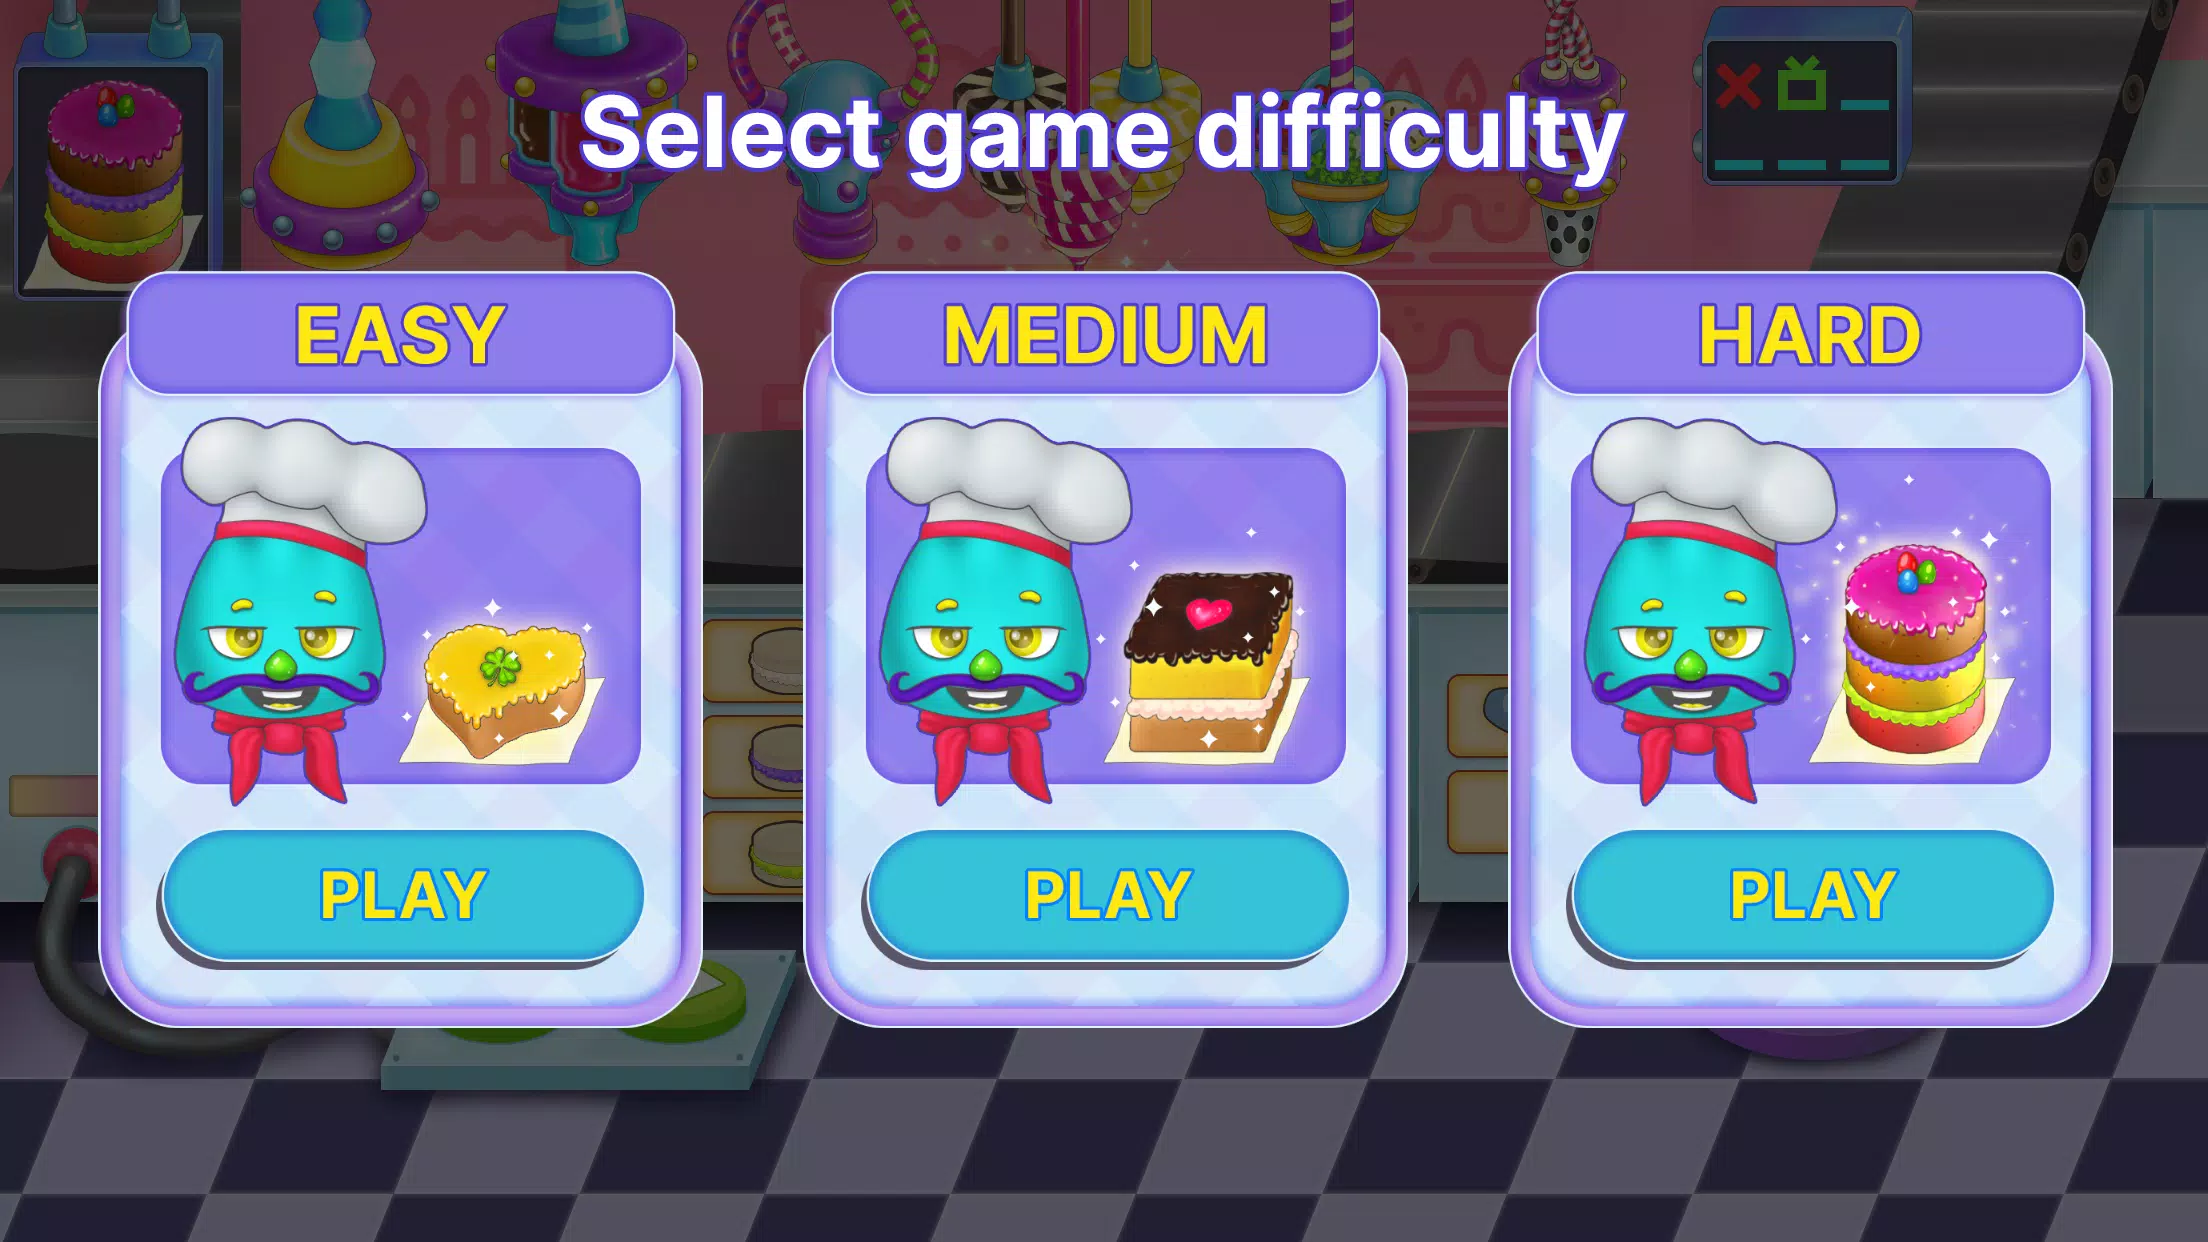 purble place fabricante bolo – Apps no Google Play